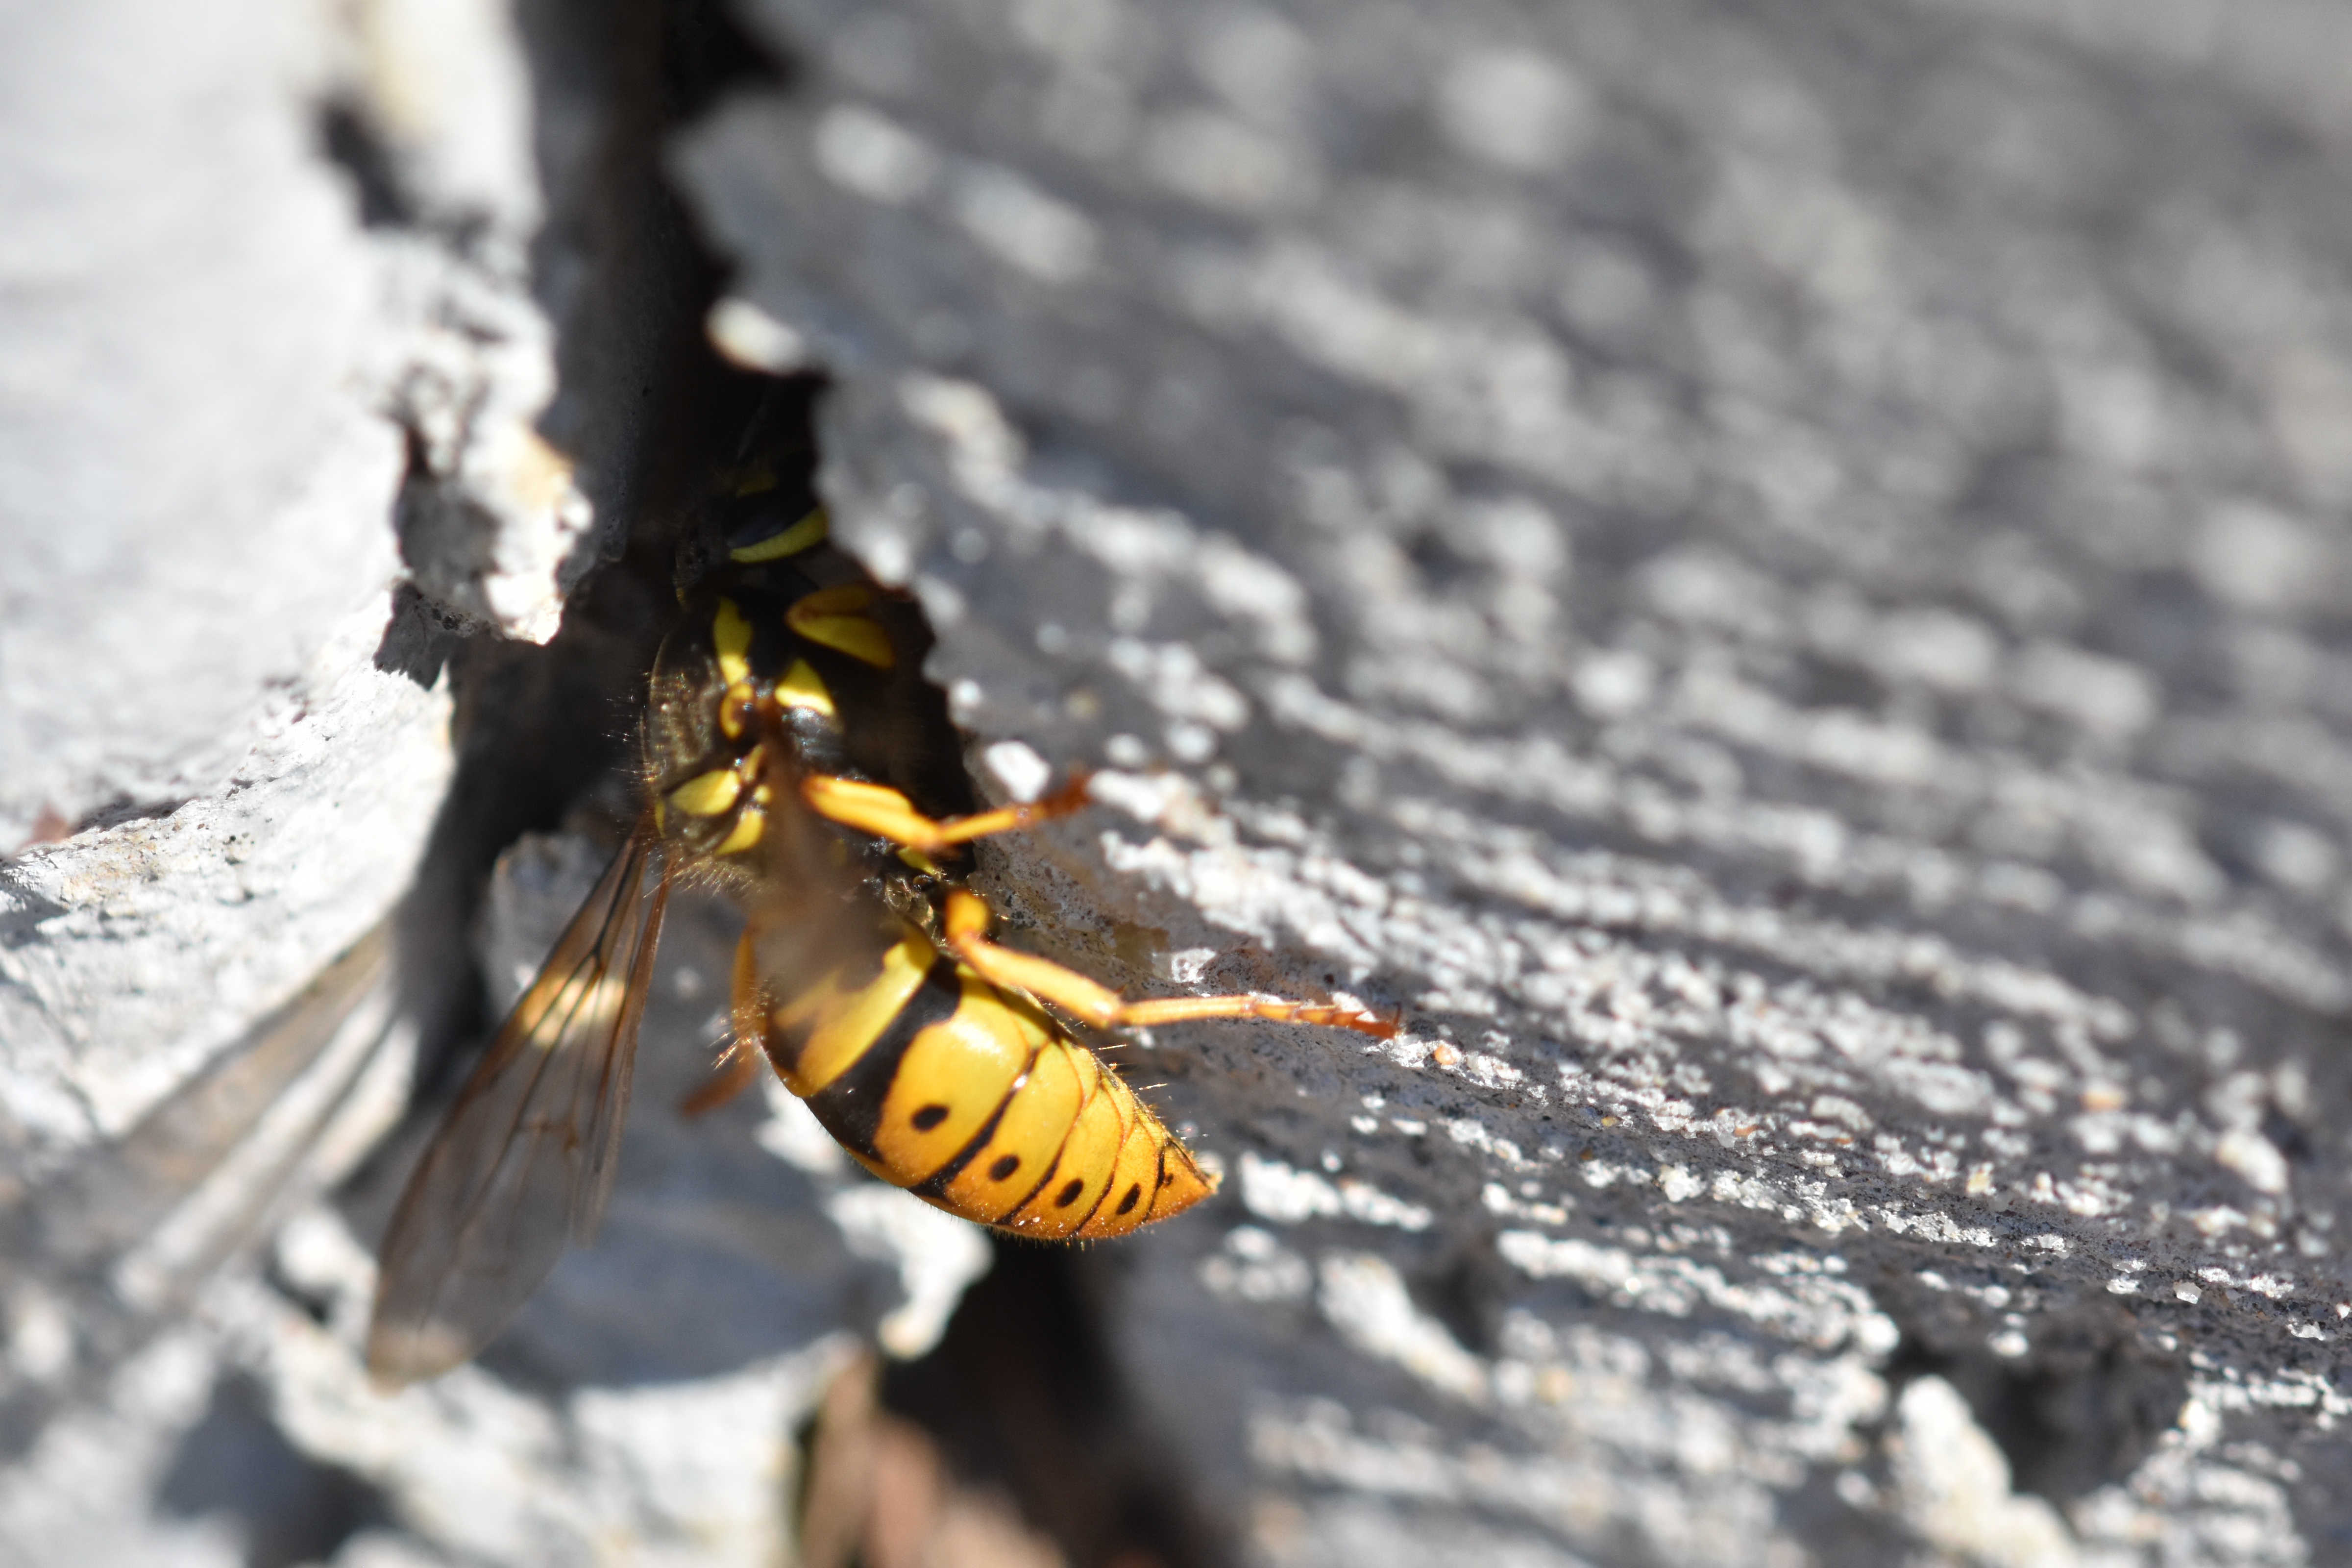 Yellow Jacket Pest Control in NJ and Bucks County PA